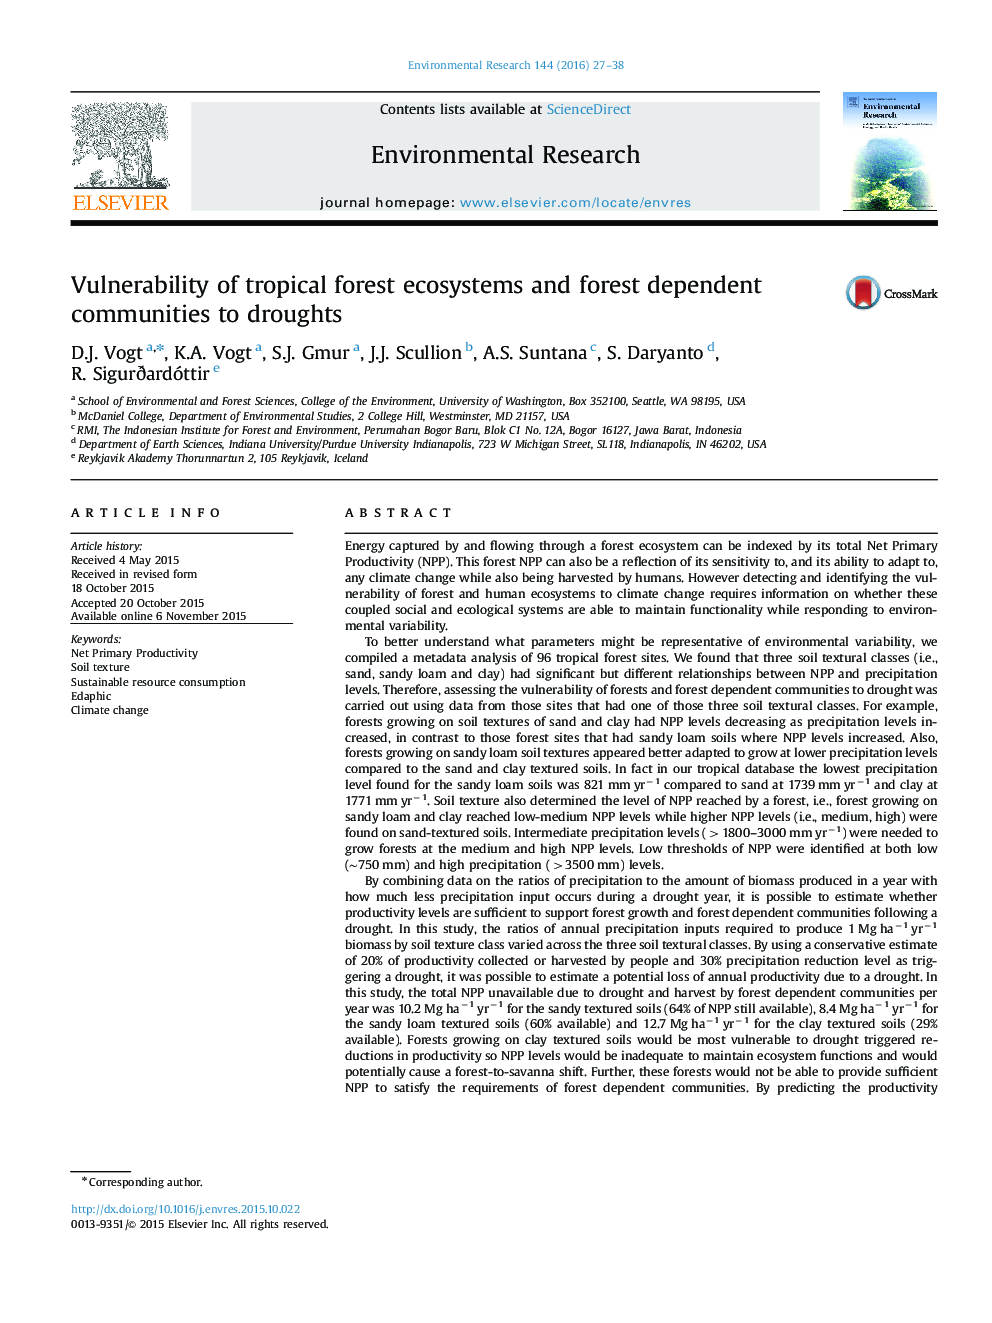 Vulnerability of tropical forest ecosystems and forest dependent communities to droughts